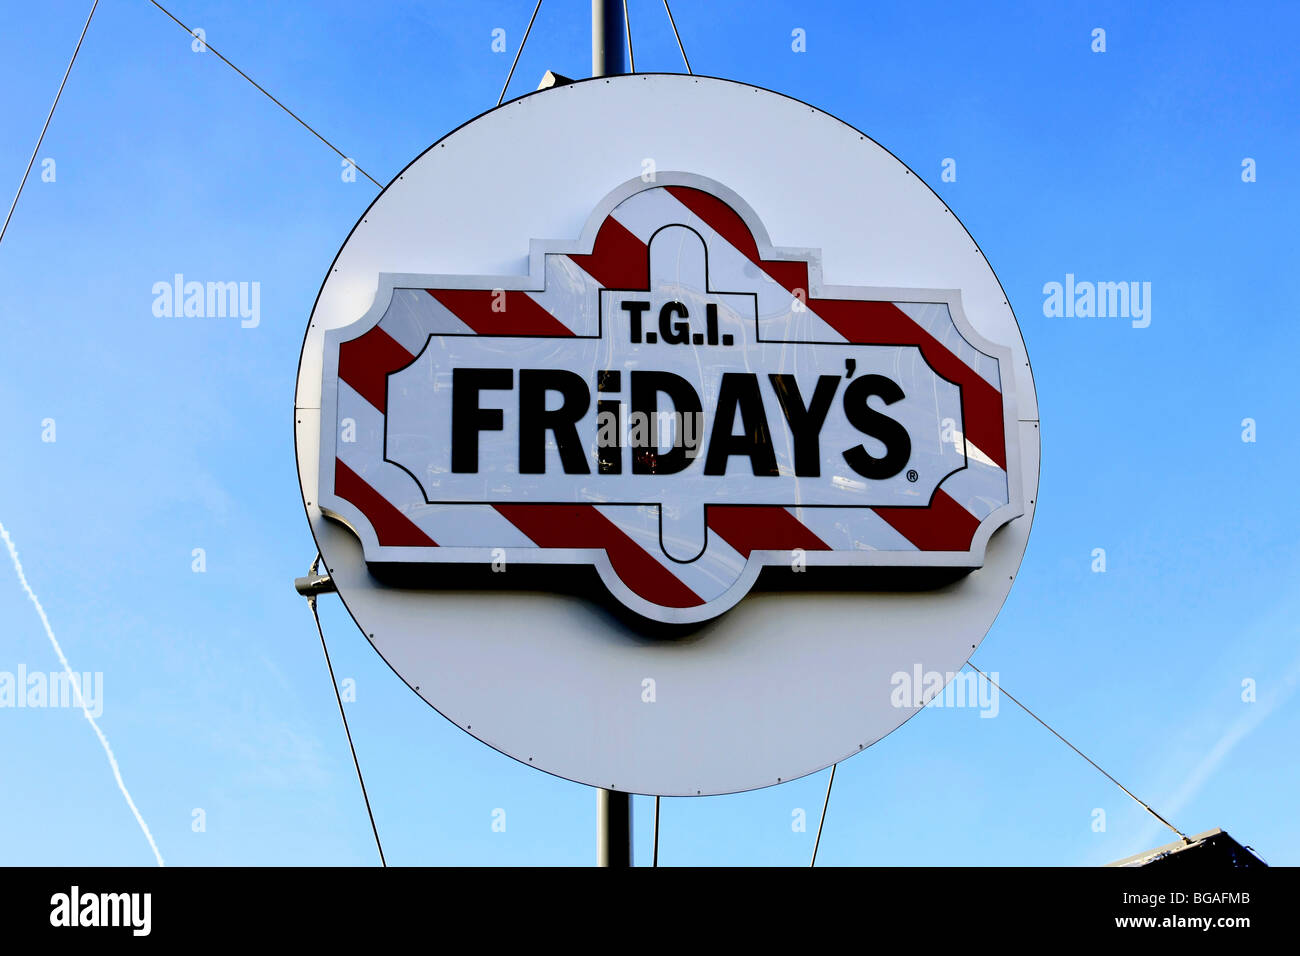 T.g.i Friday's night spot sign Banque D'Images